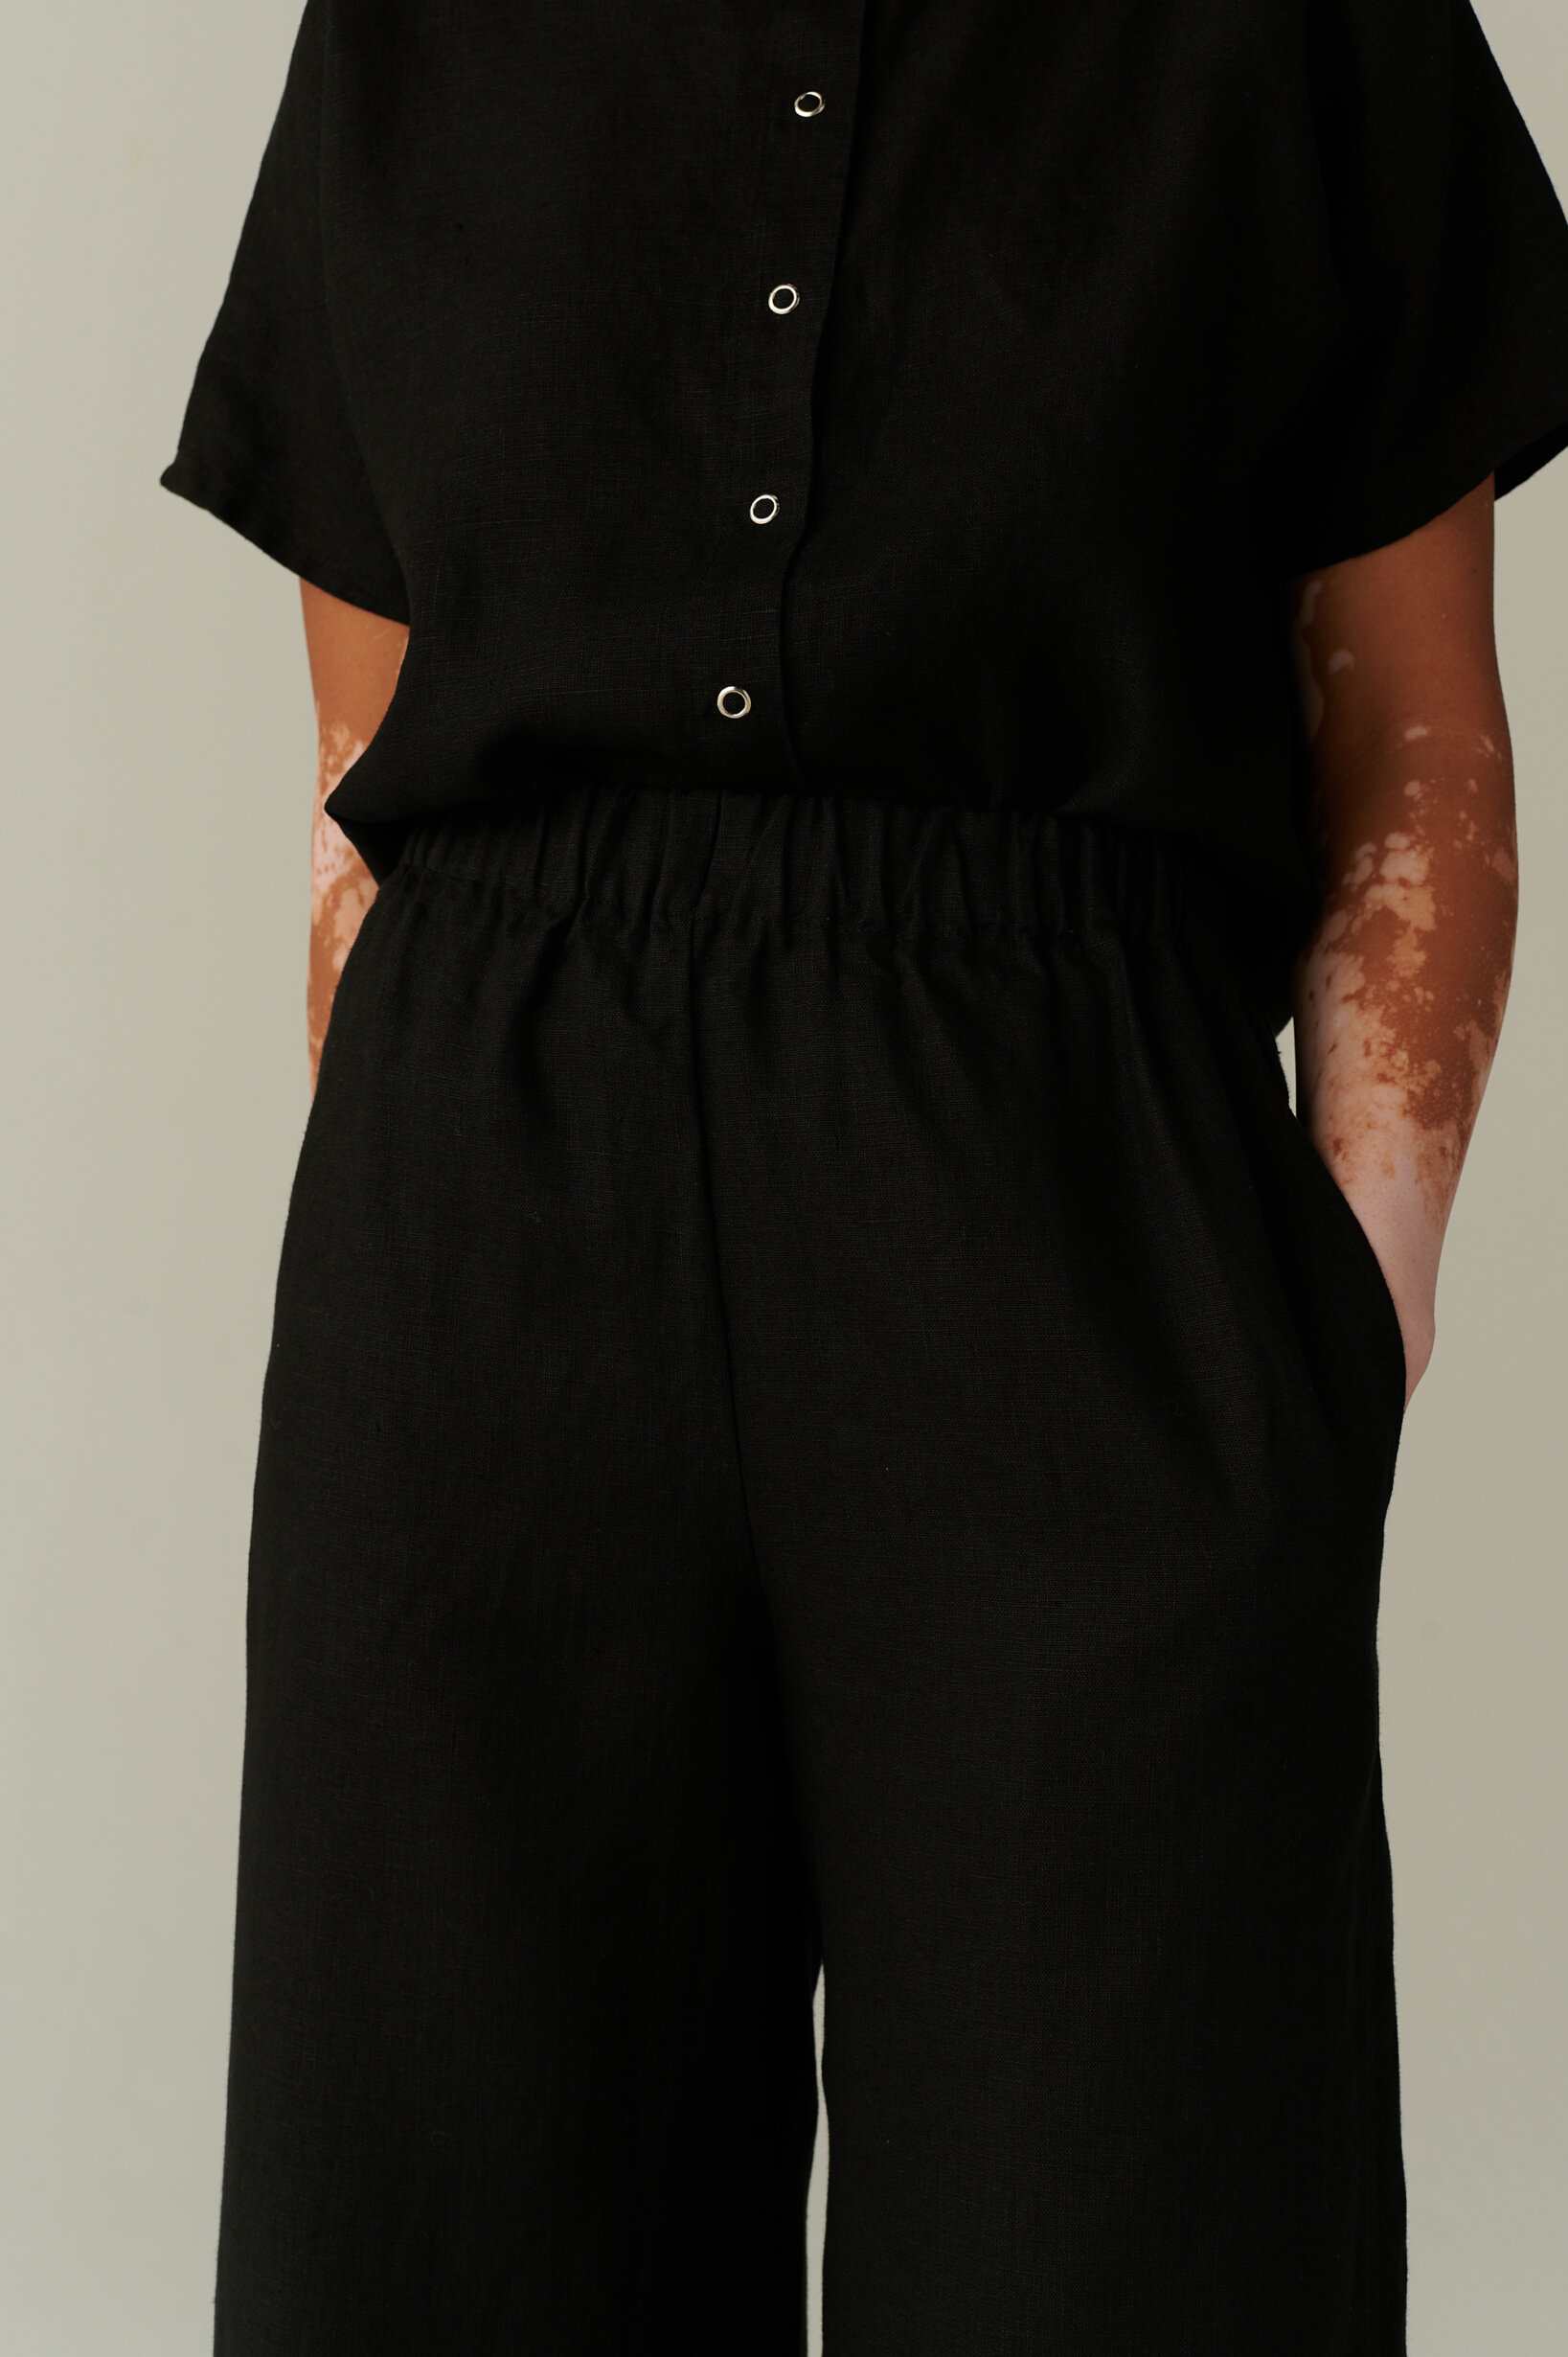 Loose fitting black linen shirt tucked into an elasticated waistband of linen trousers with pockets